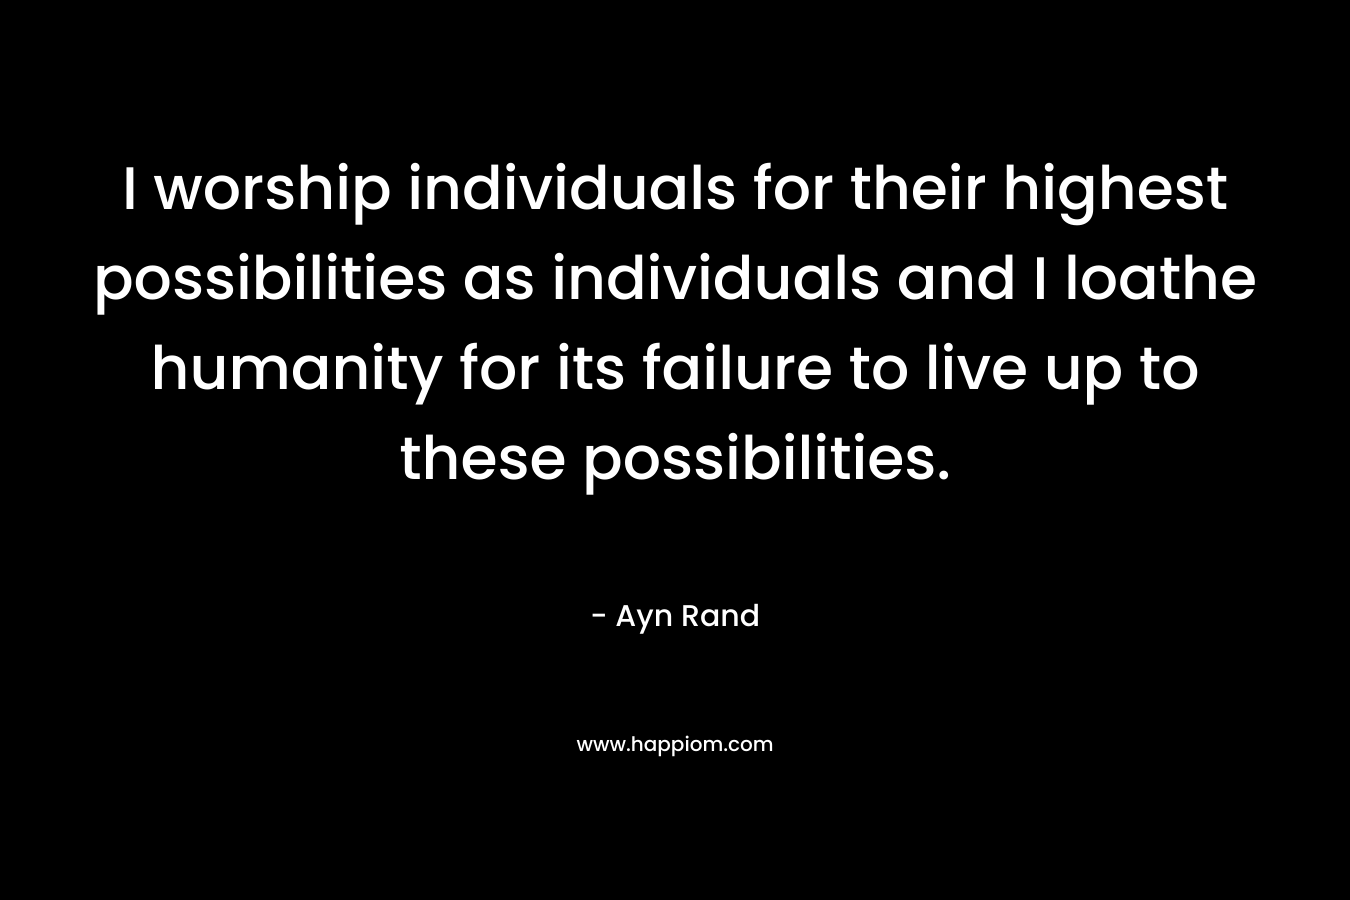 I worship individuals for their highest possibilities as individuals and I loathe humanity for its failure to live up to these possibilities.